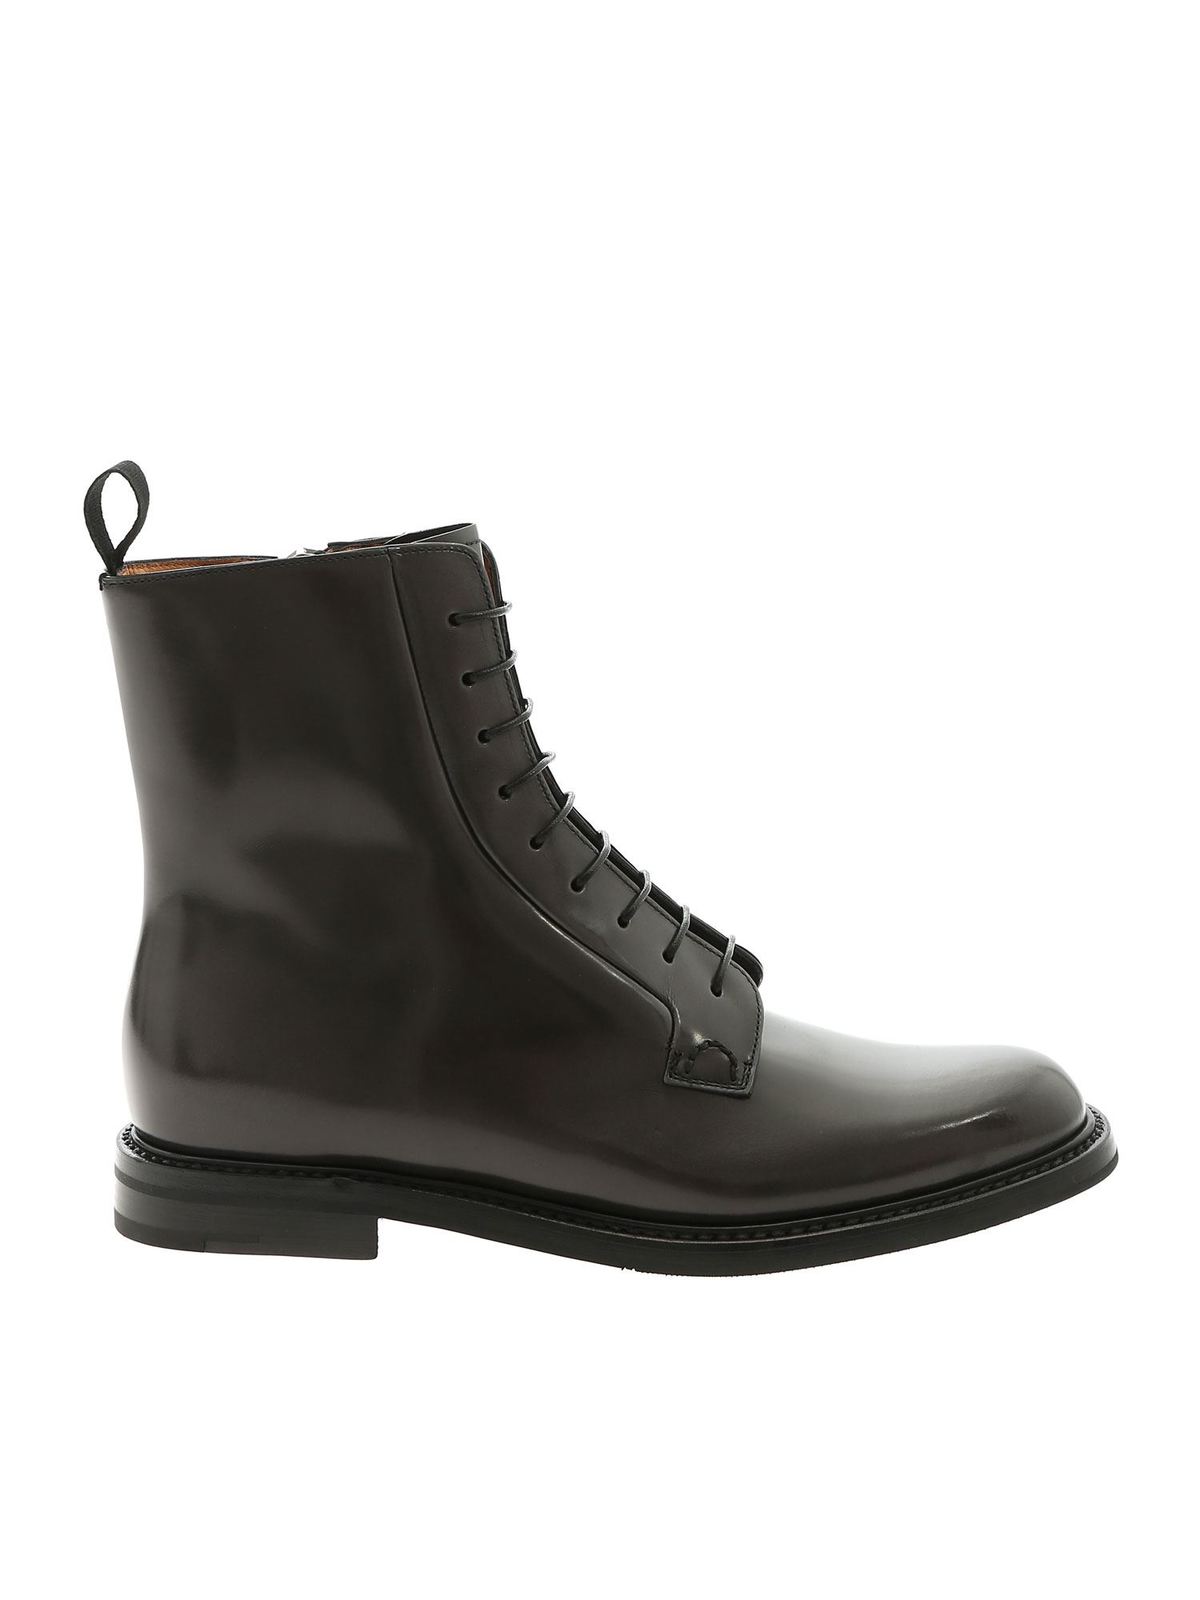 CHURCH'S POLISHED LEATHER ANKLE BOOTS